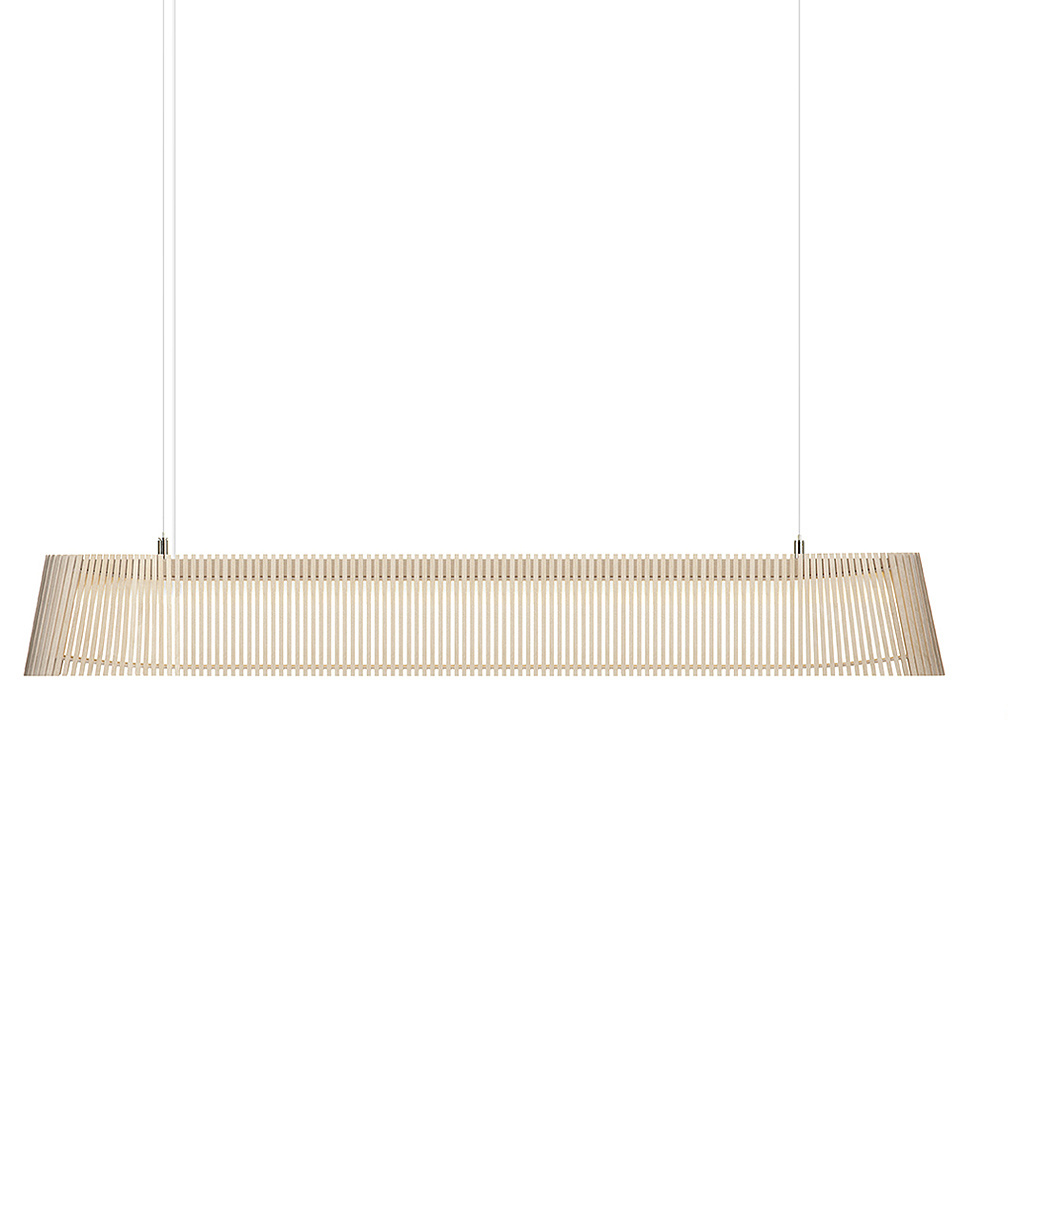 Owalo 7000 pendant lamp is available in natural birch